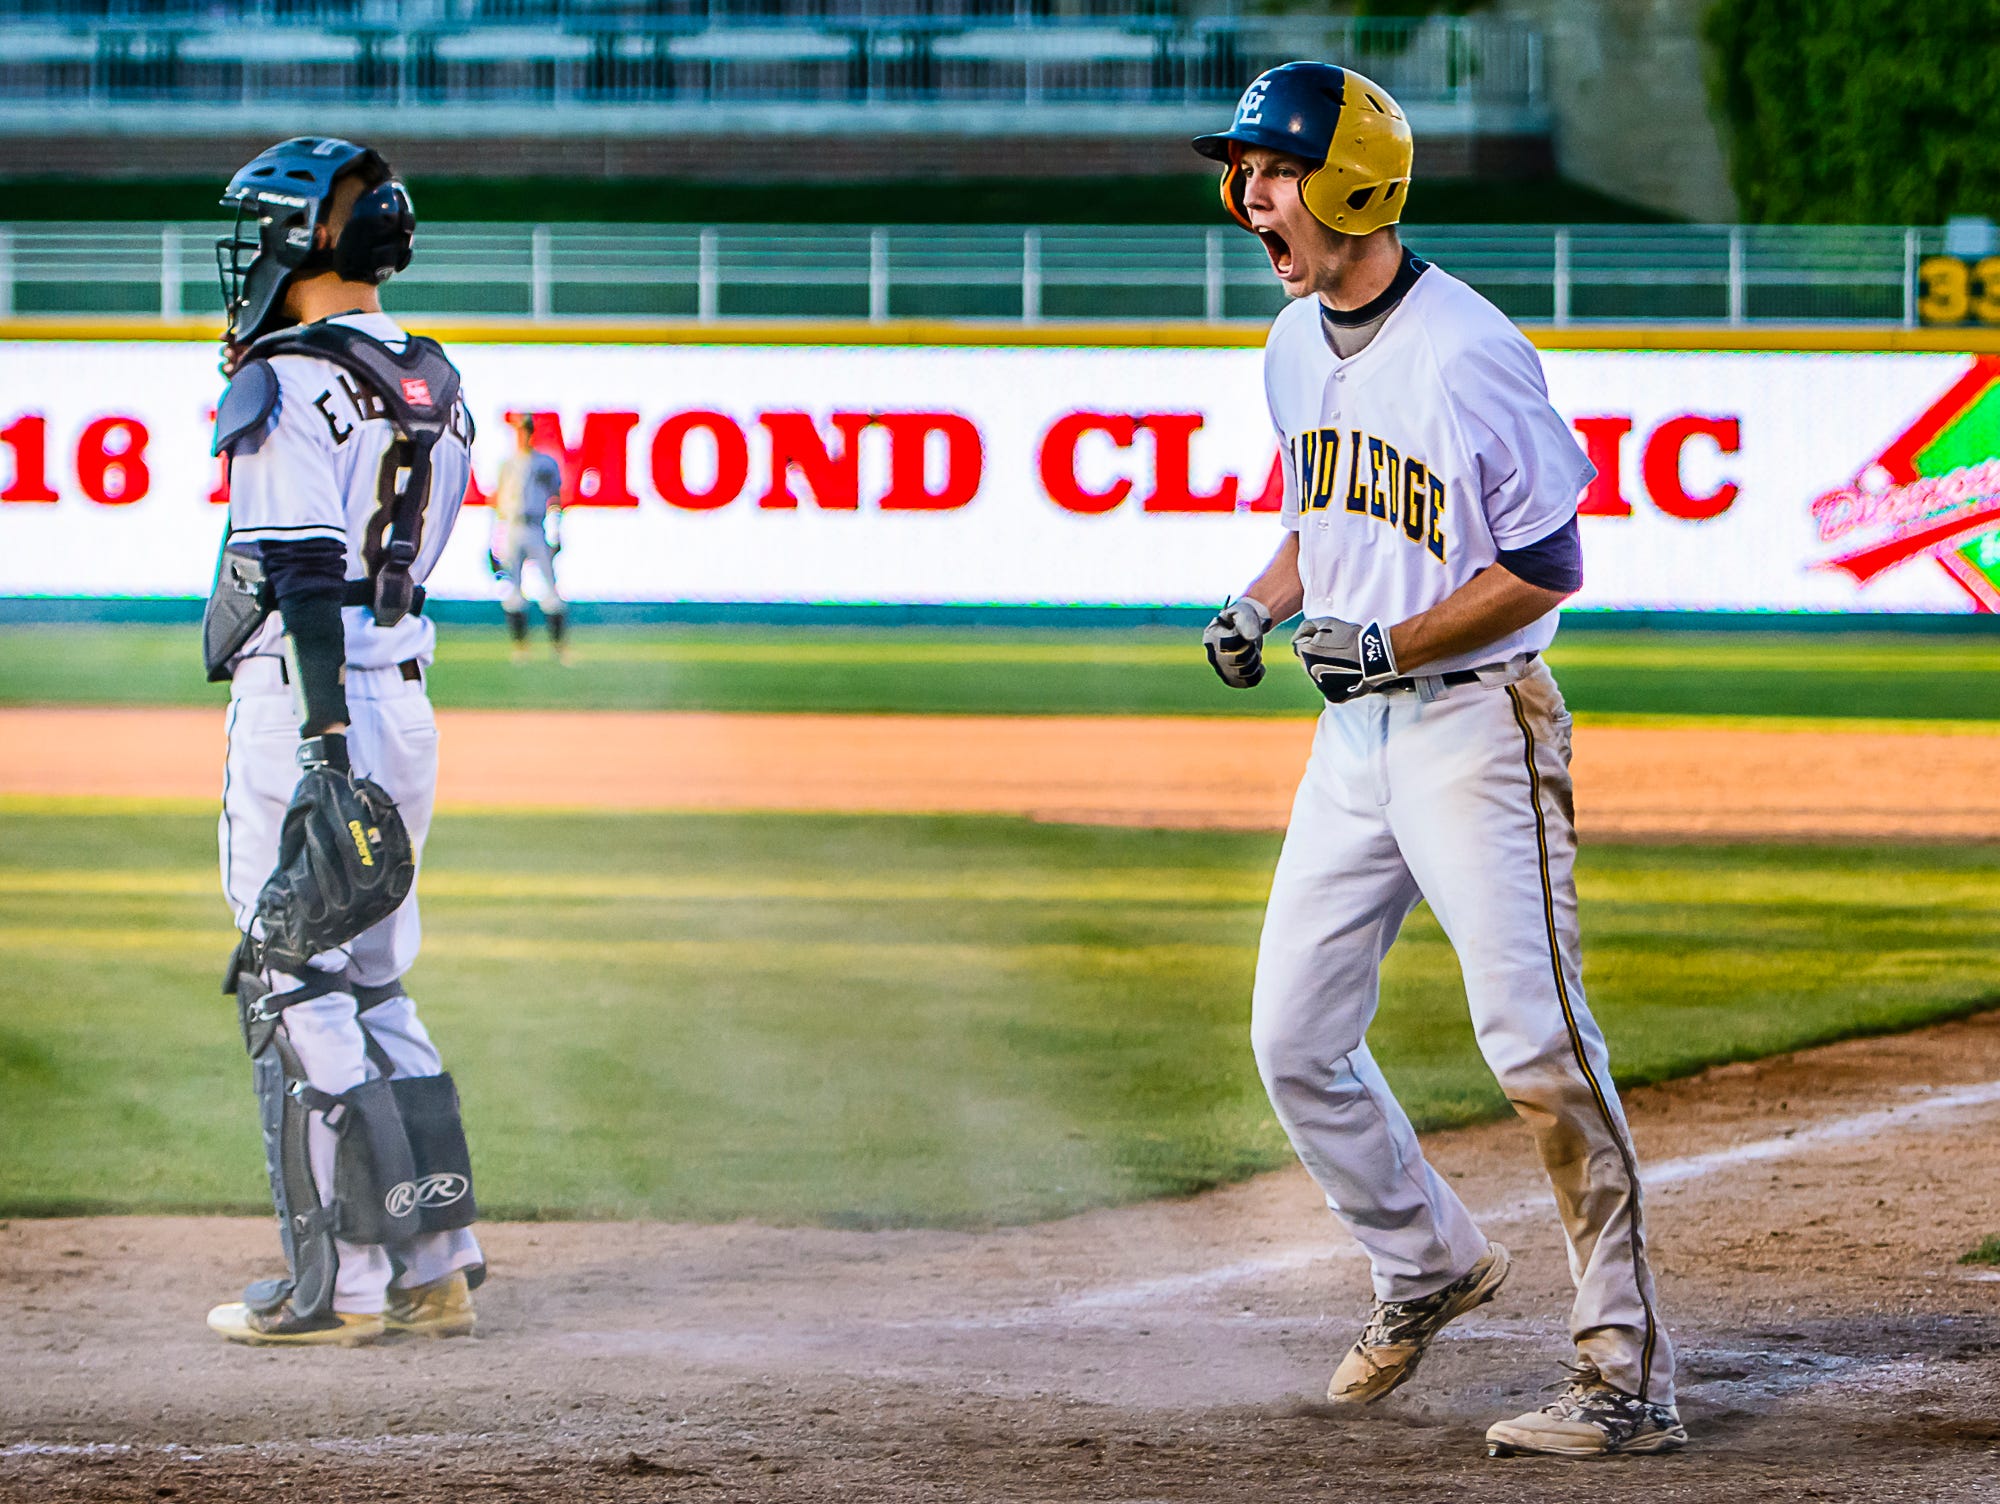 Brendan Baker of Grand Ledge celebrates after scoring to cut the Holt lead to one in the 5th inning of their Diamond Classic championship game Wednesday.